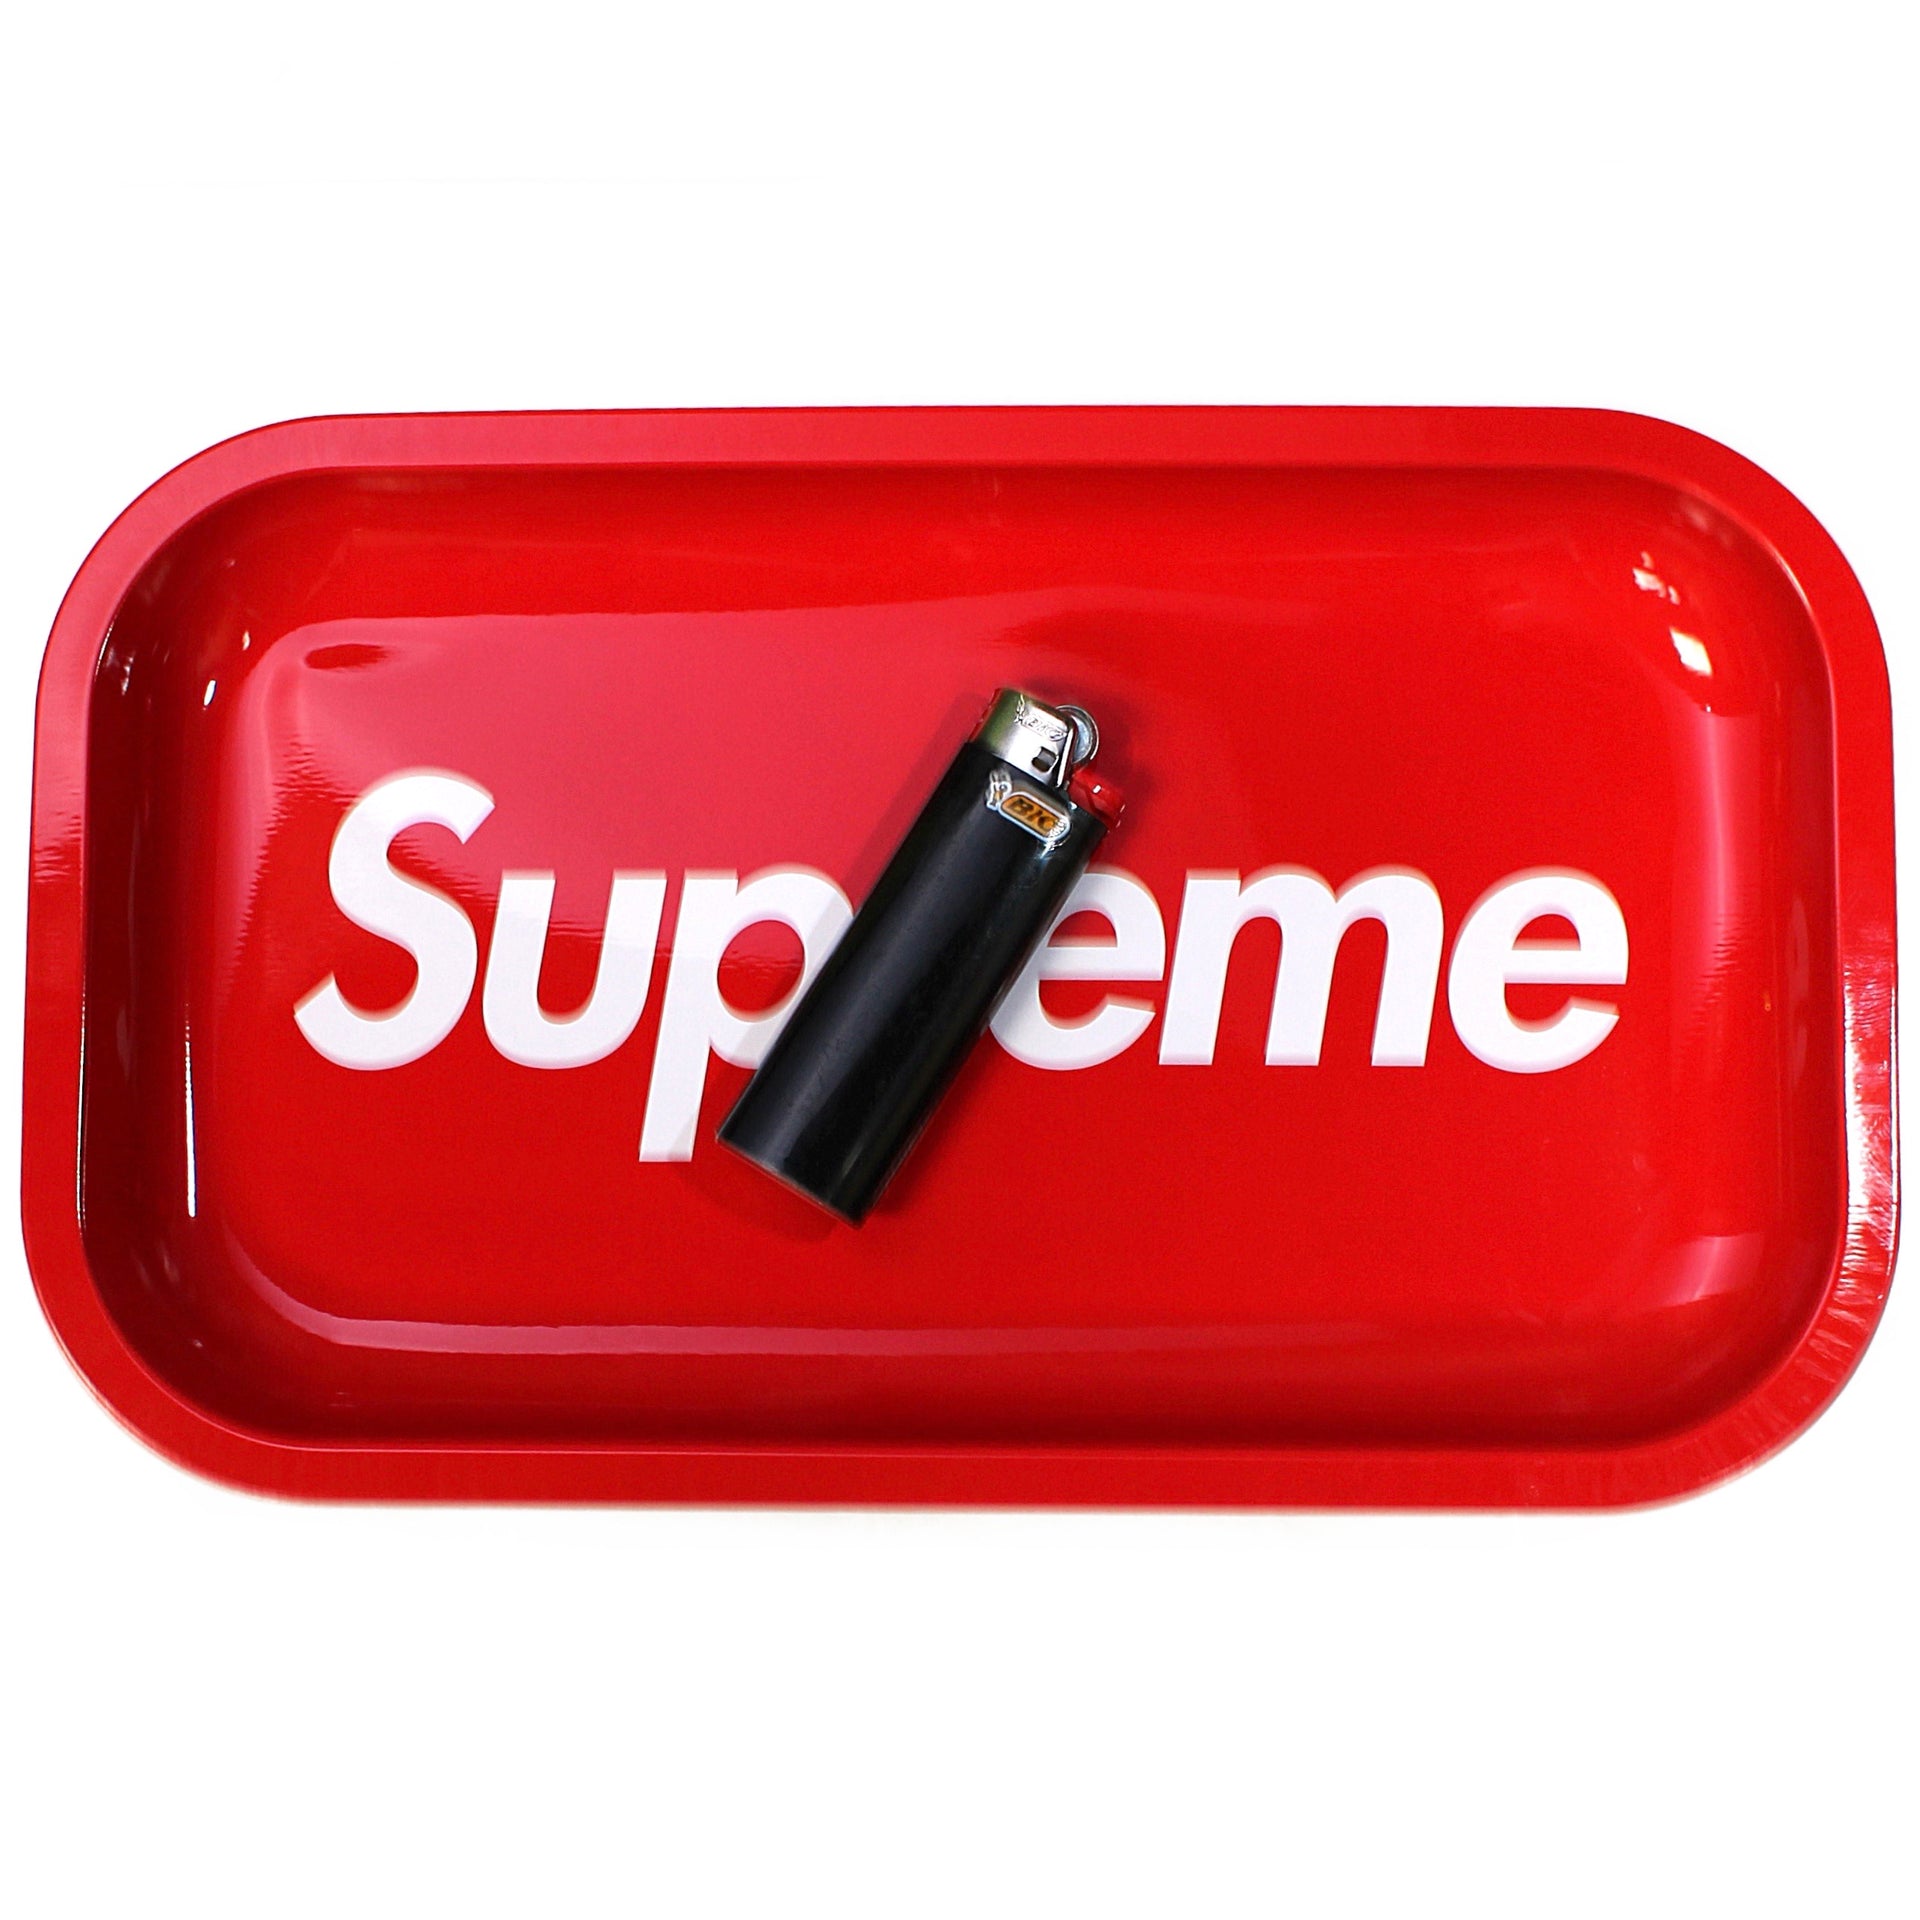 Supreme red rolling tray